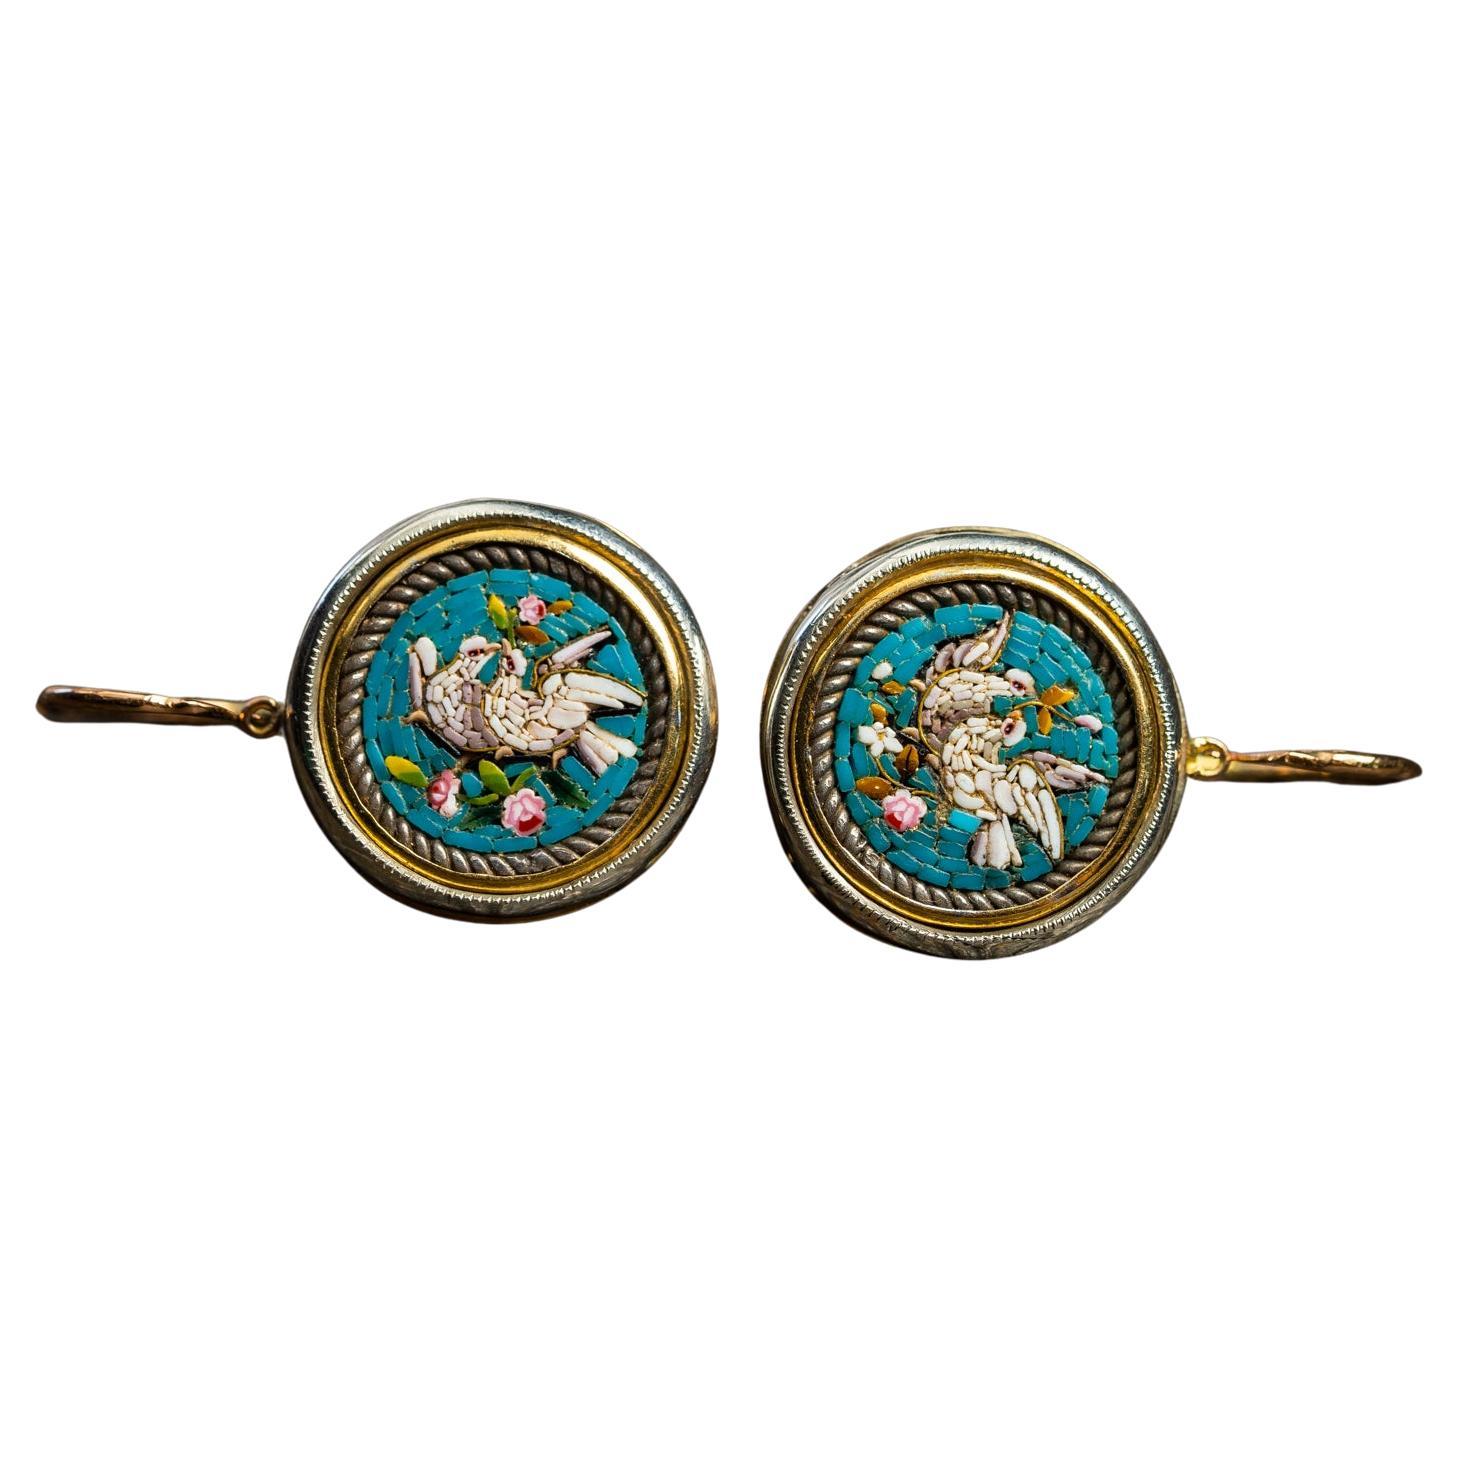 A truly remarkable and rare Italian antique micro mosaic earrings. These earrings are made of solid 12 ct gold and are decorated with a perfectly preserved micro mosaic.

The mosaic depicts two beautiful doves surrounded by florals. From the ancient